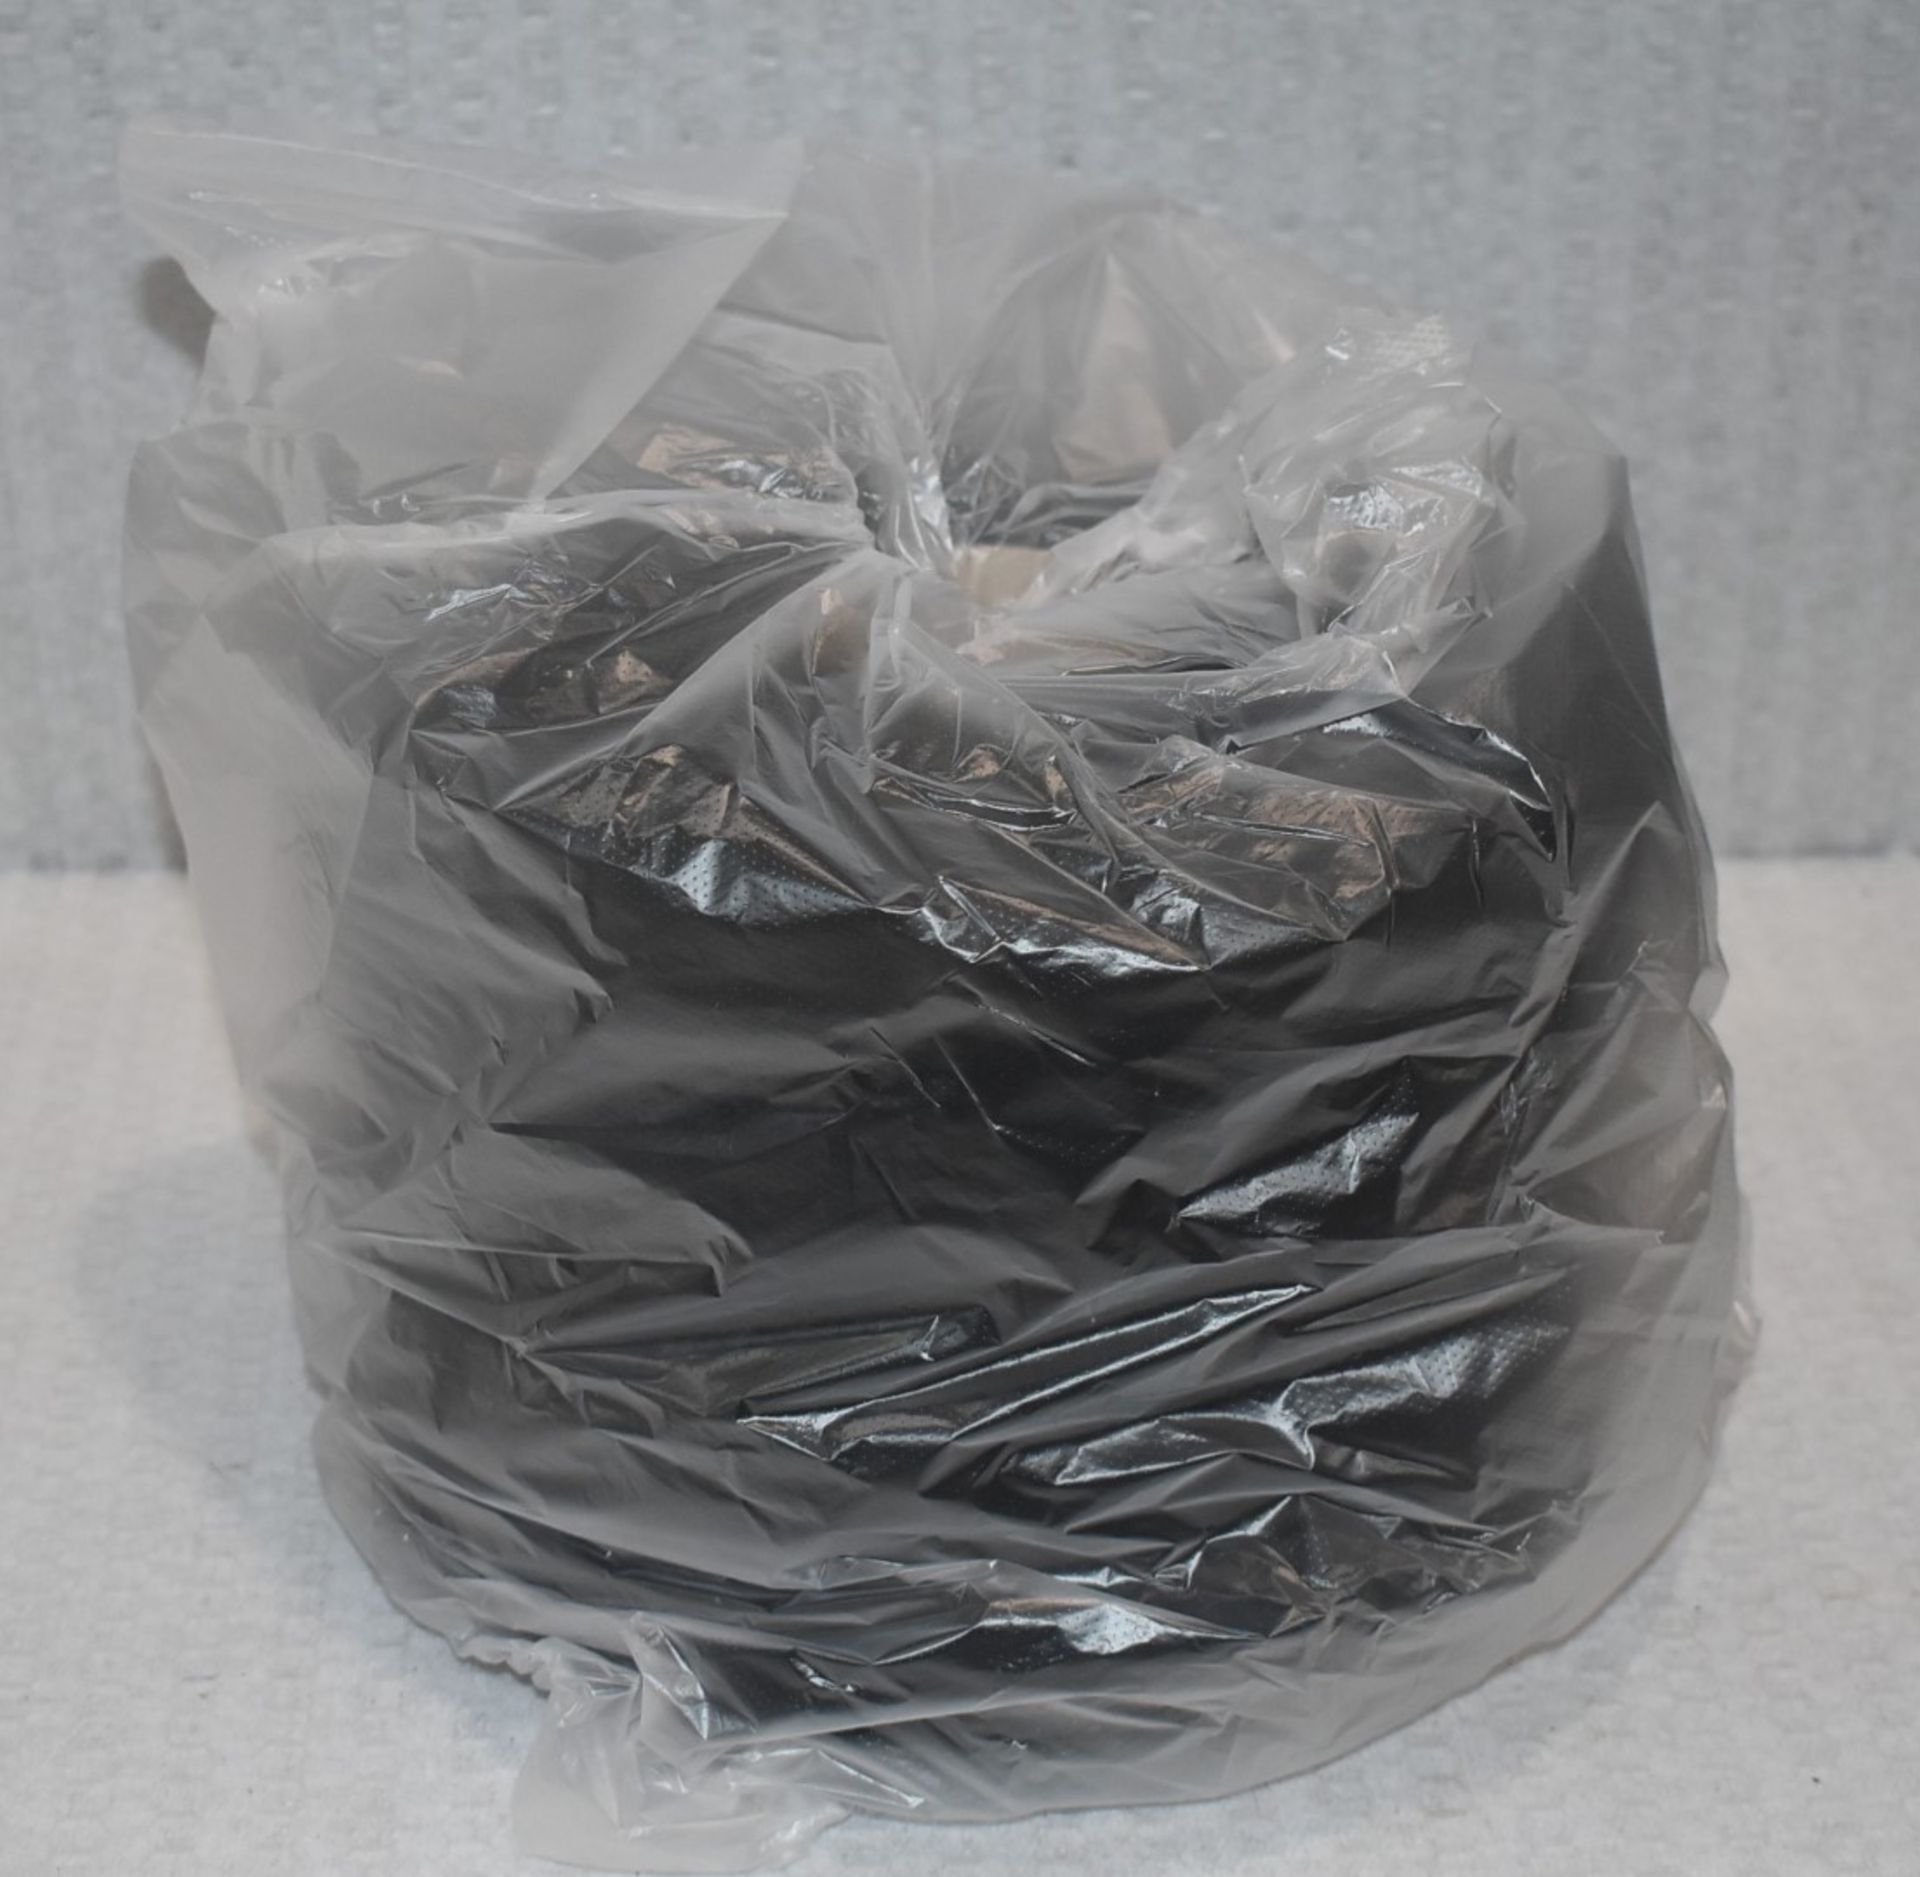 12 x Cones of 1/7,5 Lagona Knitting Yarn - Charcoal - Approx Weight: 2,300g - New Stock ABL Yarn - Image 5 of 11